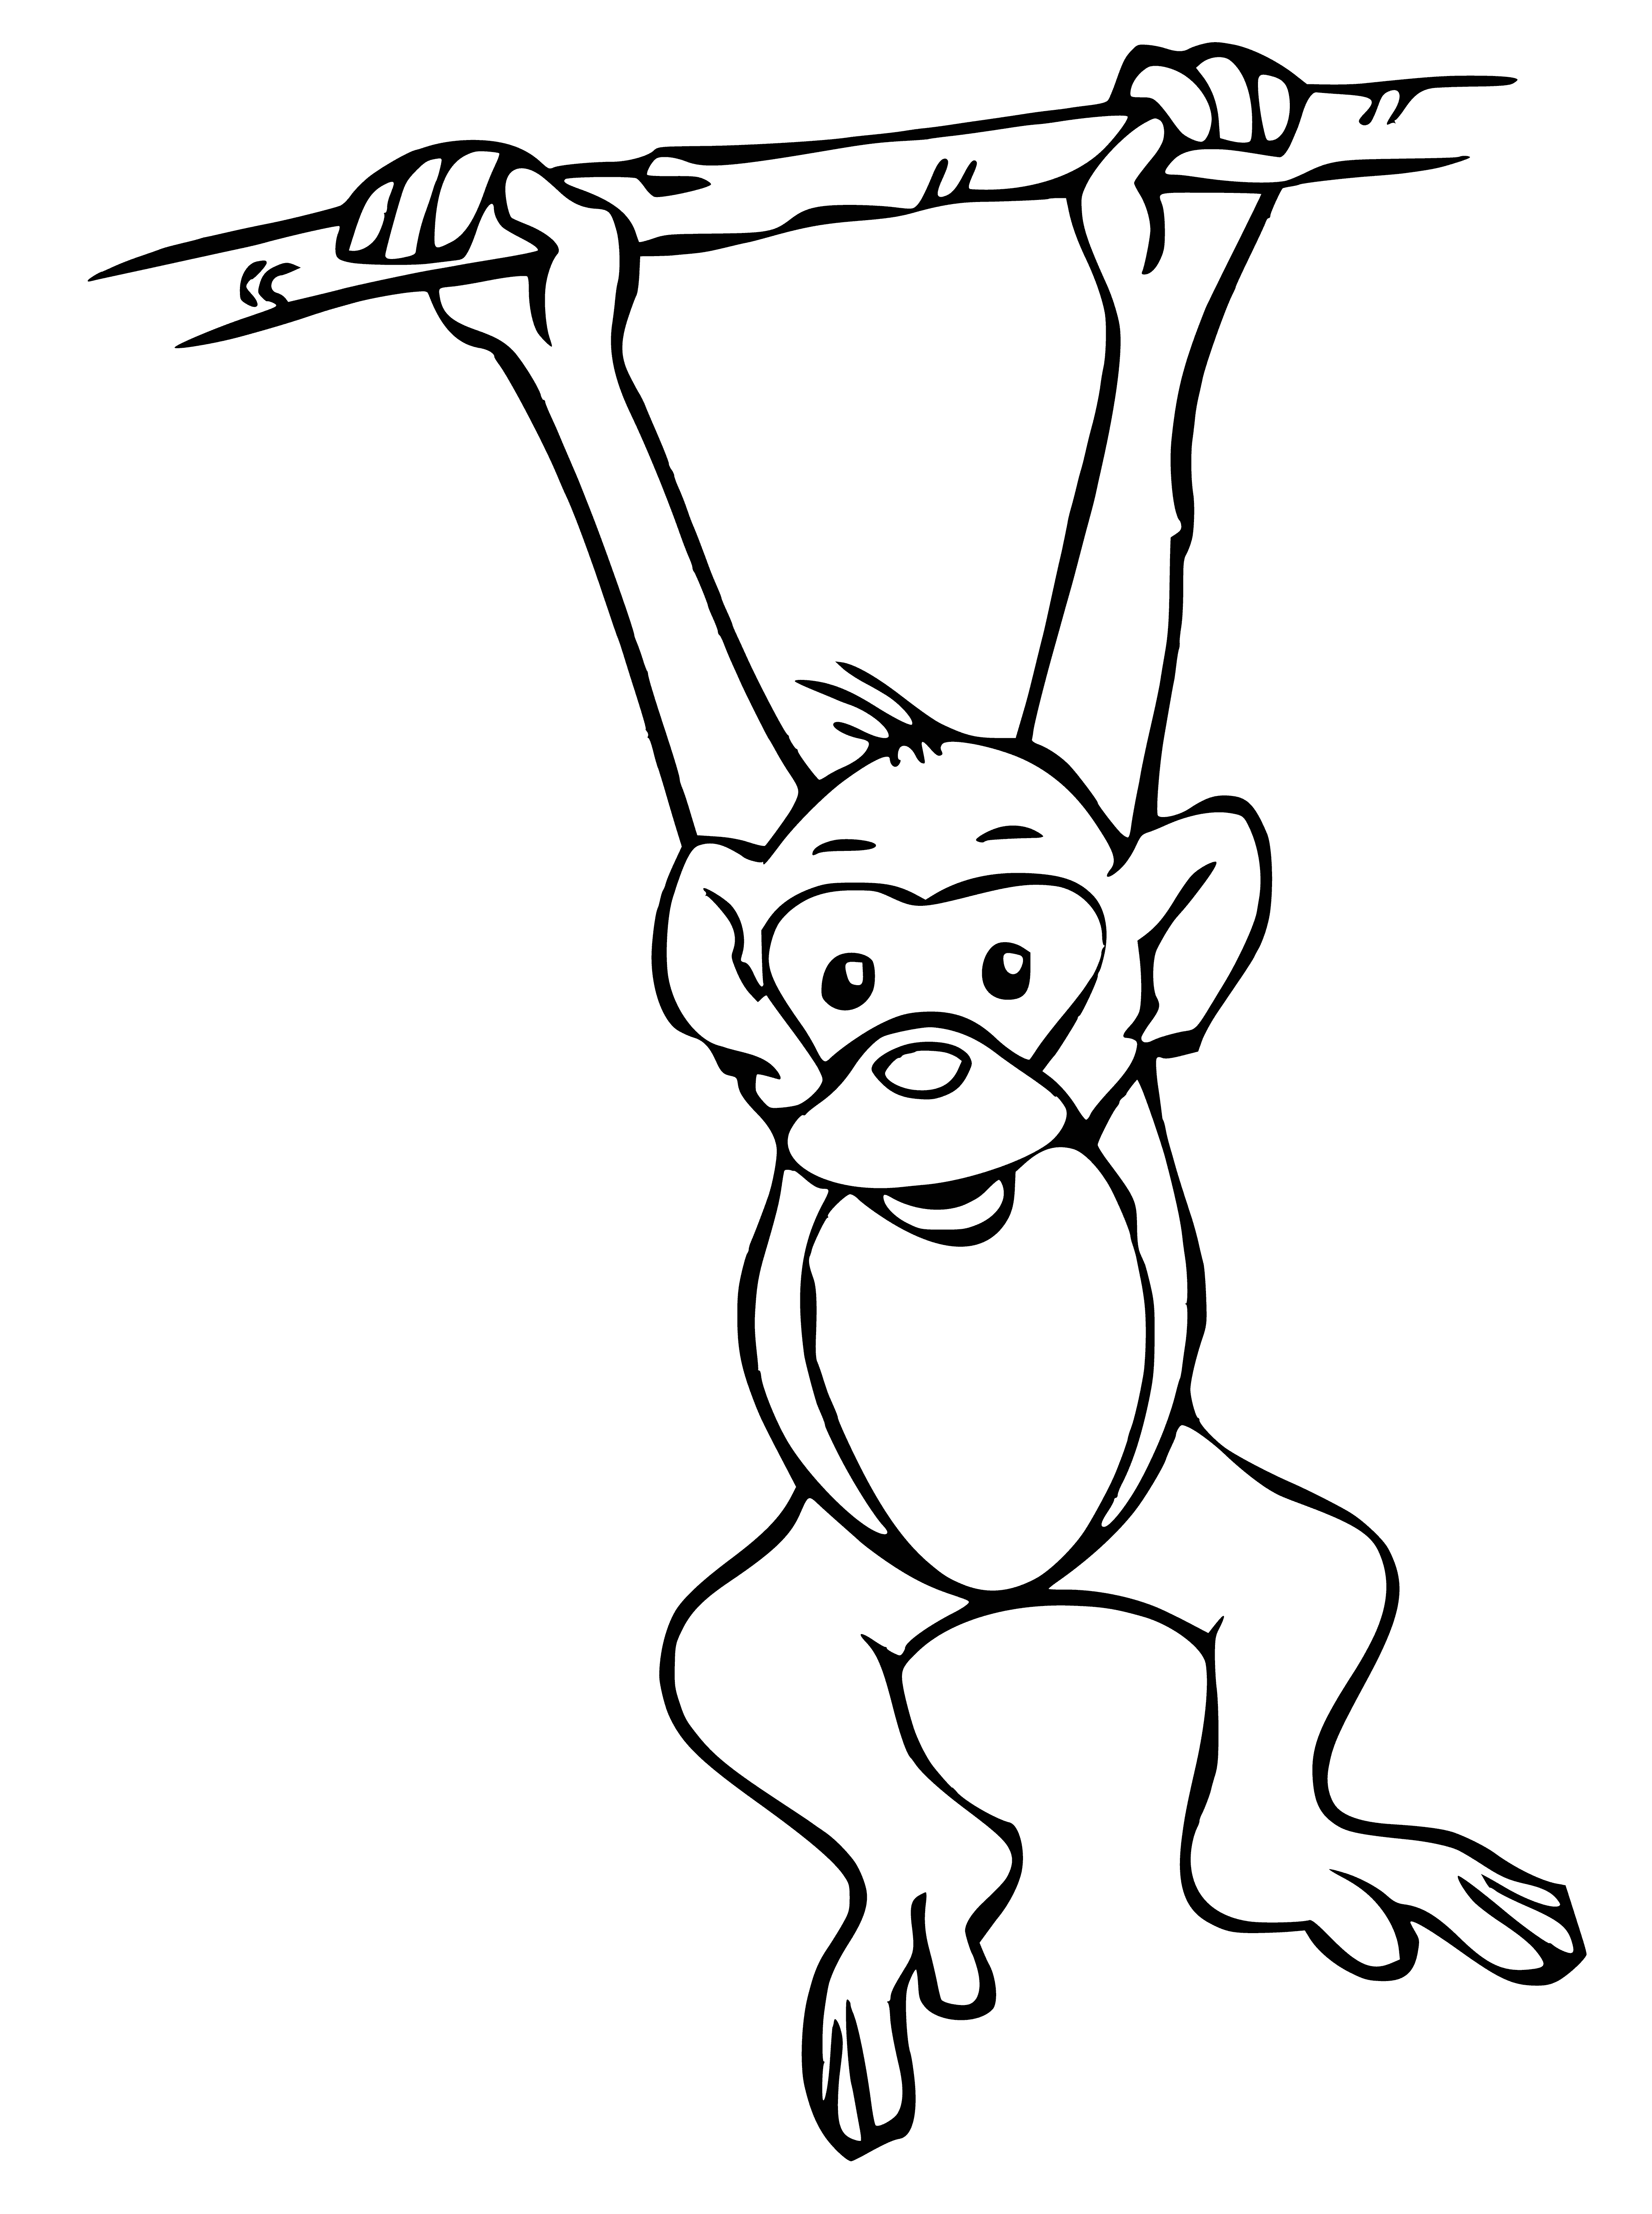 Monkey on a branch coloring page